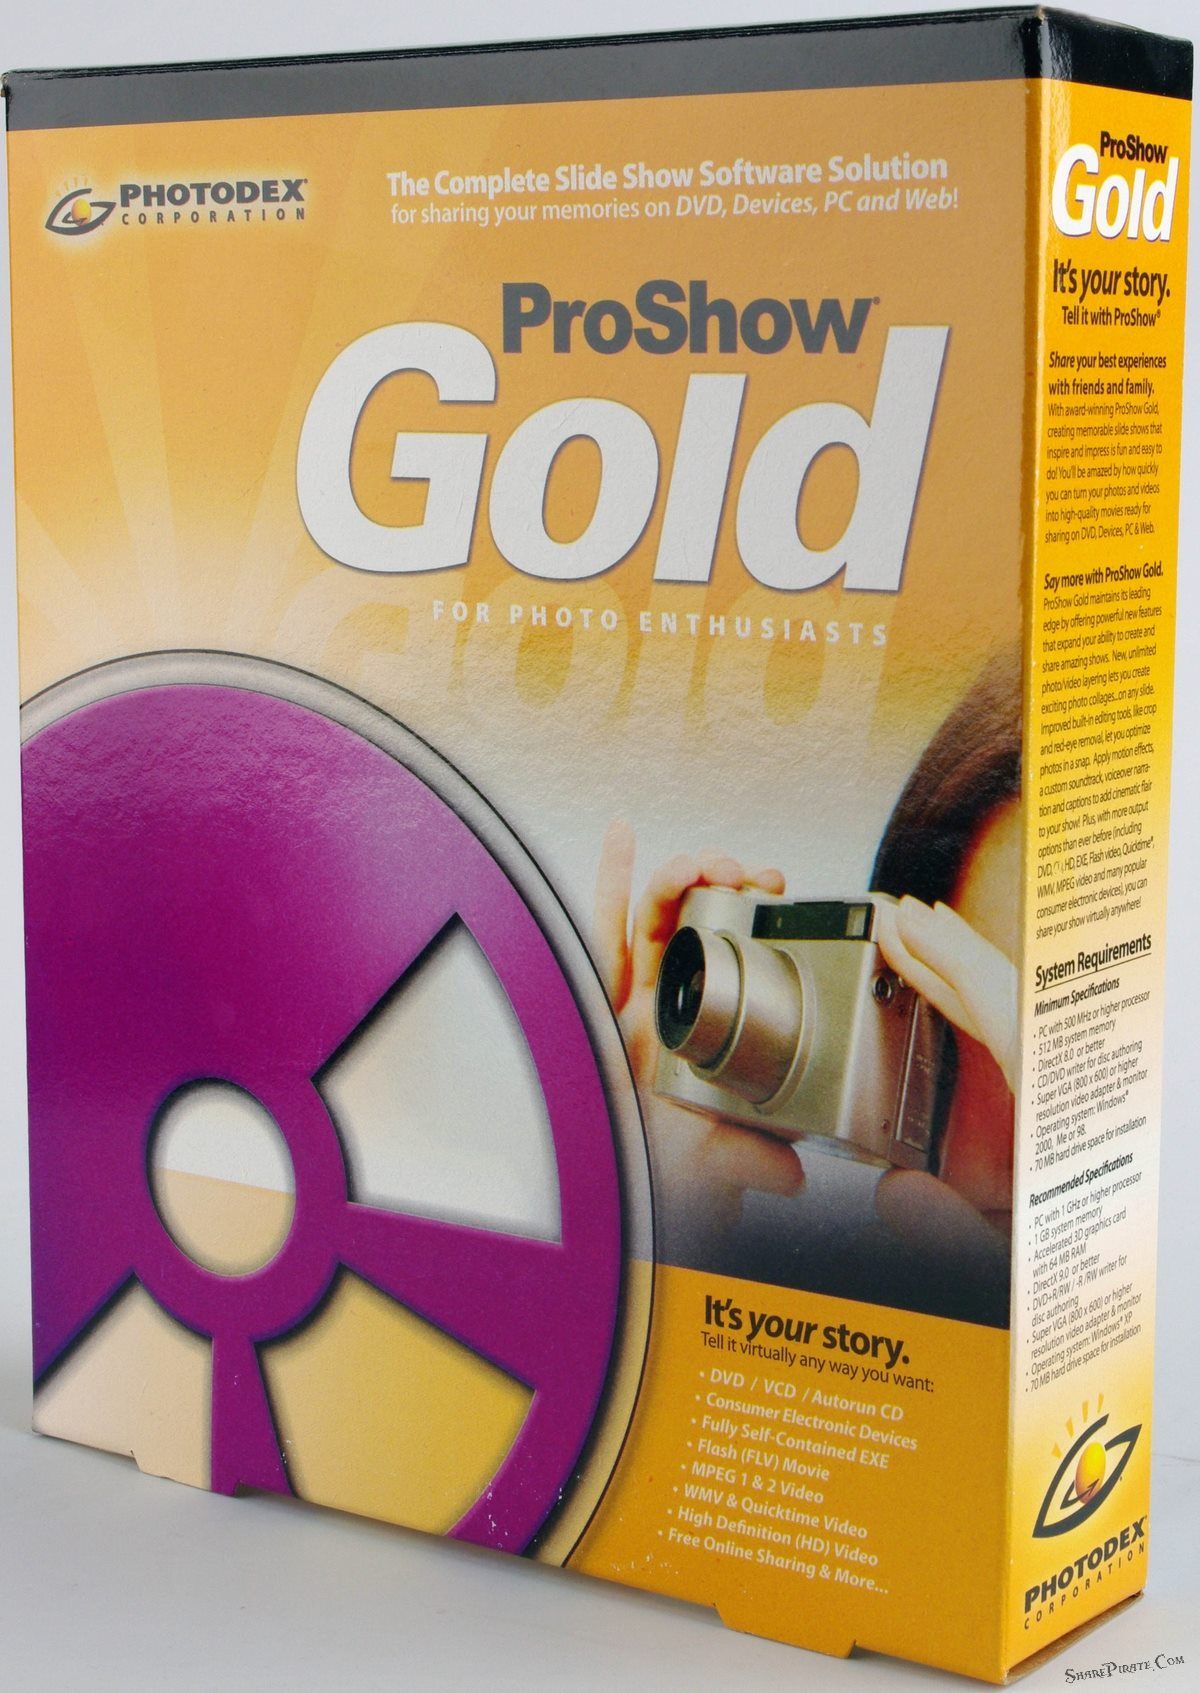 Photodex proshow gold free download not trial version